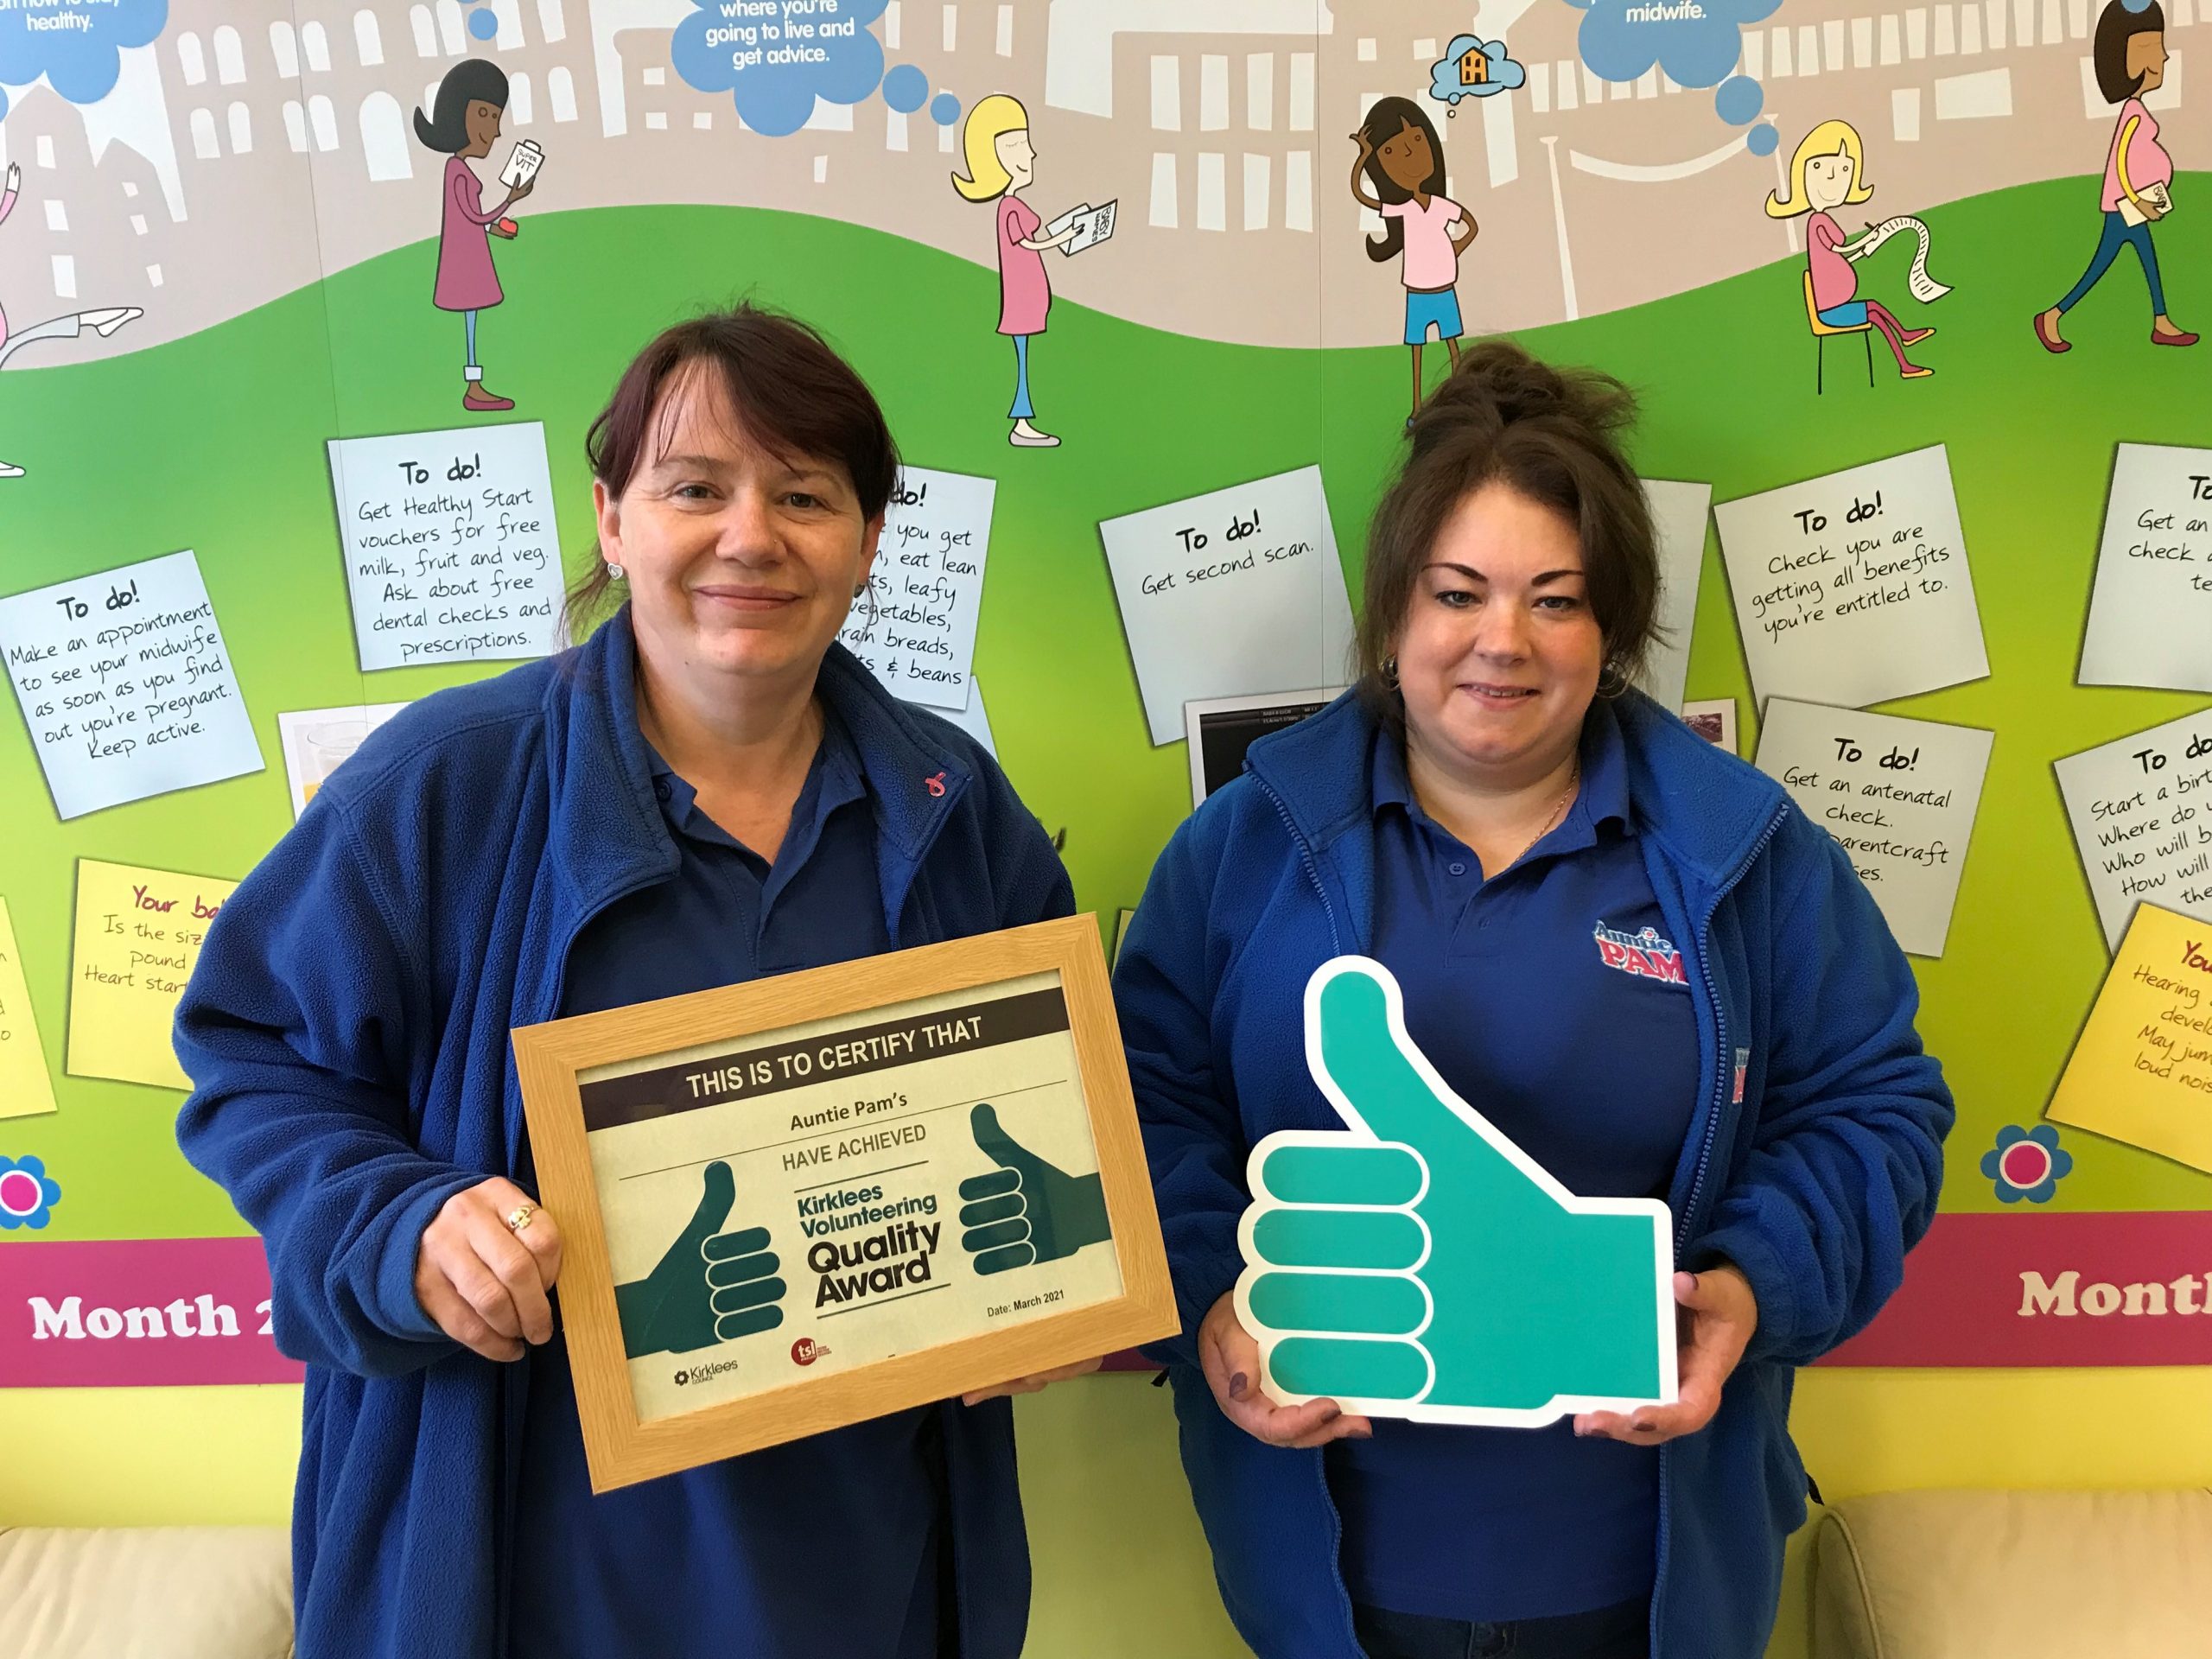 staff holding certificate and thumbs up icon.